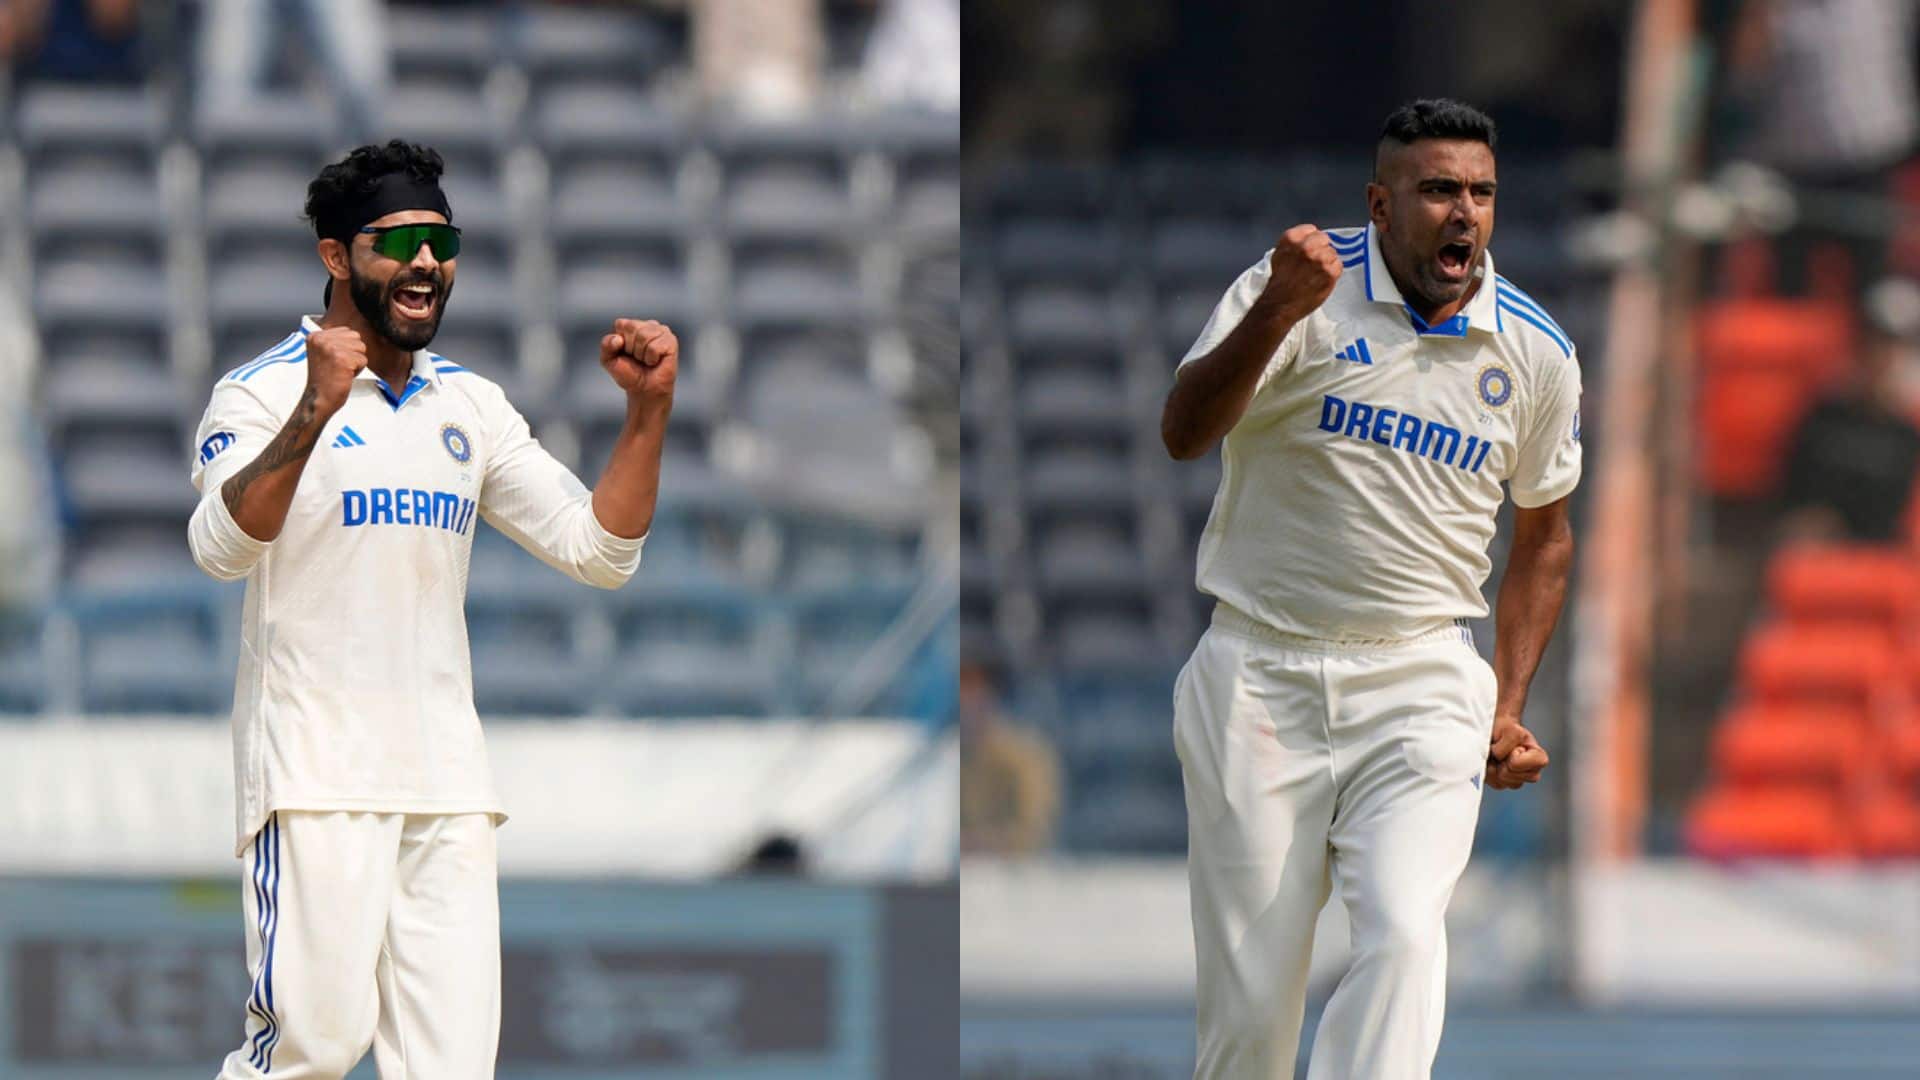 'If Ashwin Gets 500 Wickets...' - Jadeja's Big Statement Before His Spin Twin's Major Feat